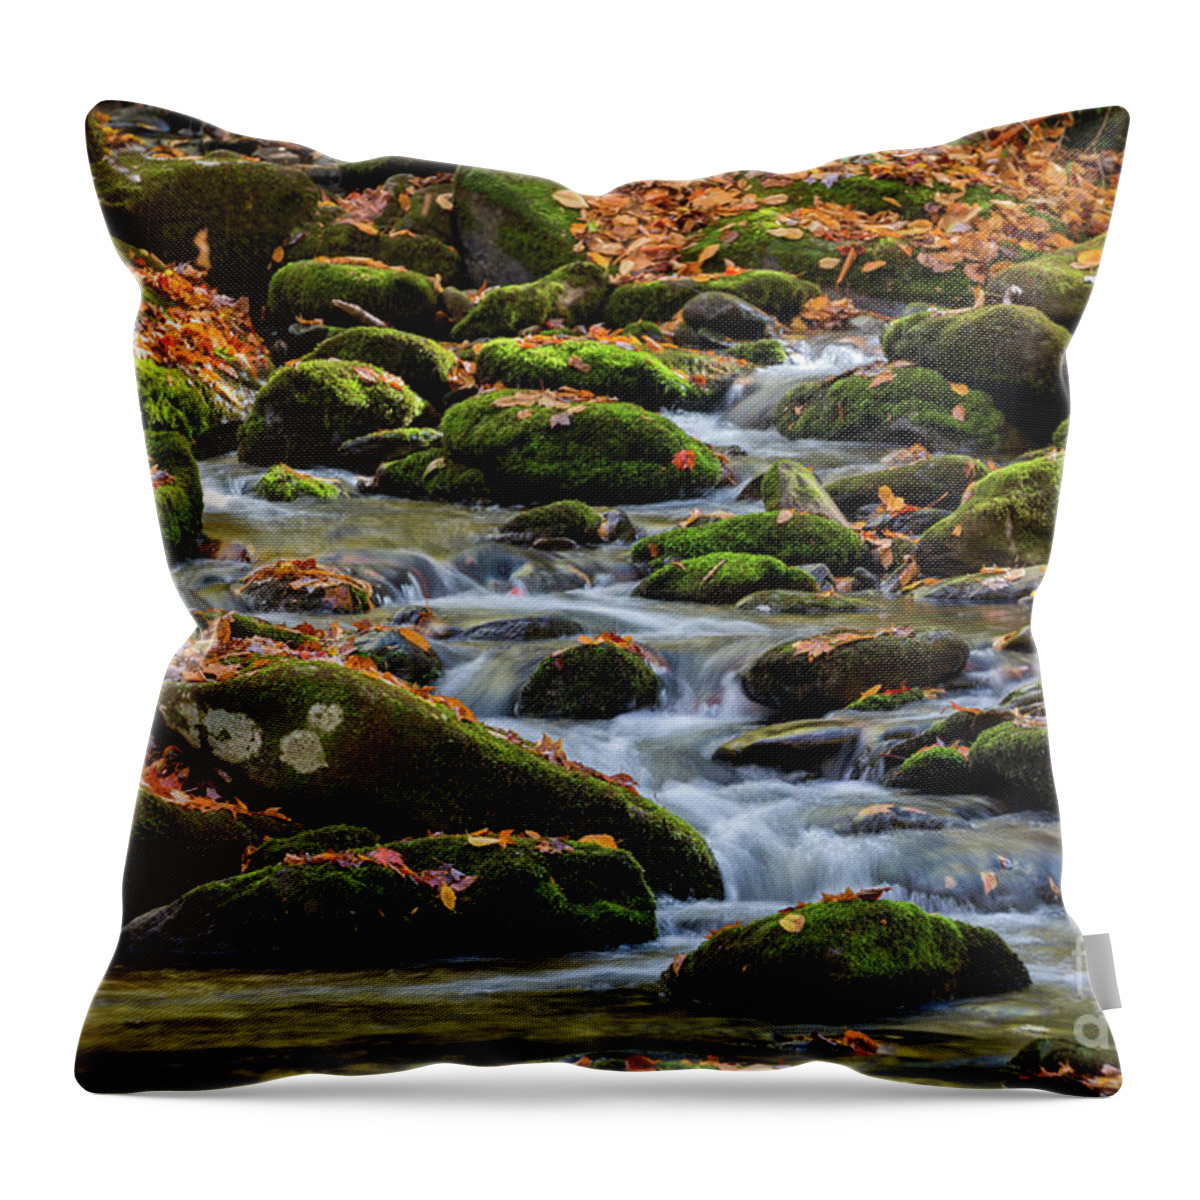 Middle Prong Little River Throw Pillow featuring the photograph Mountain Stream Cascades by Doug Sturgess